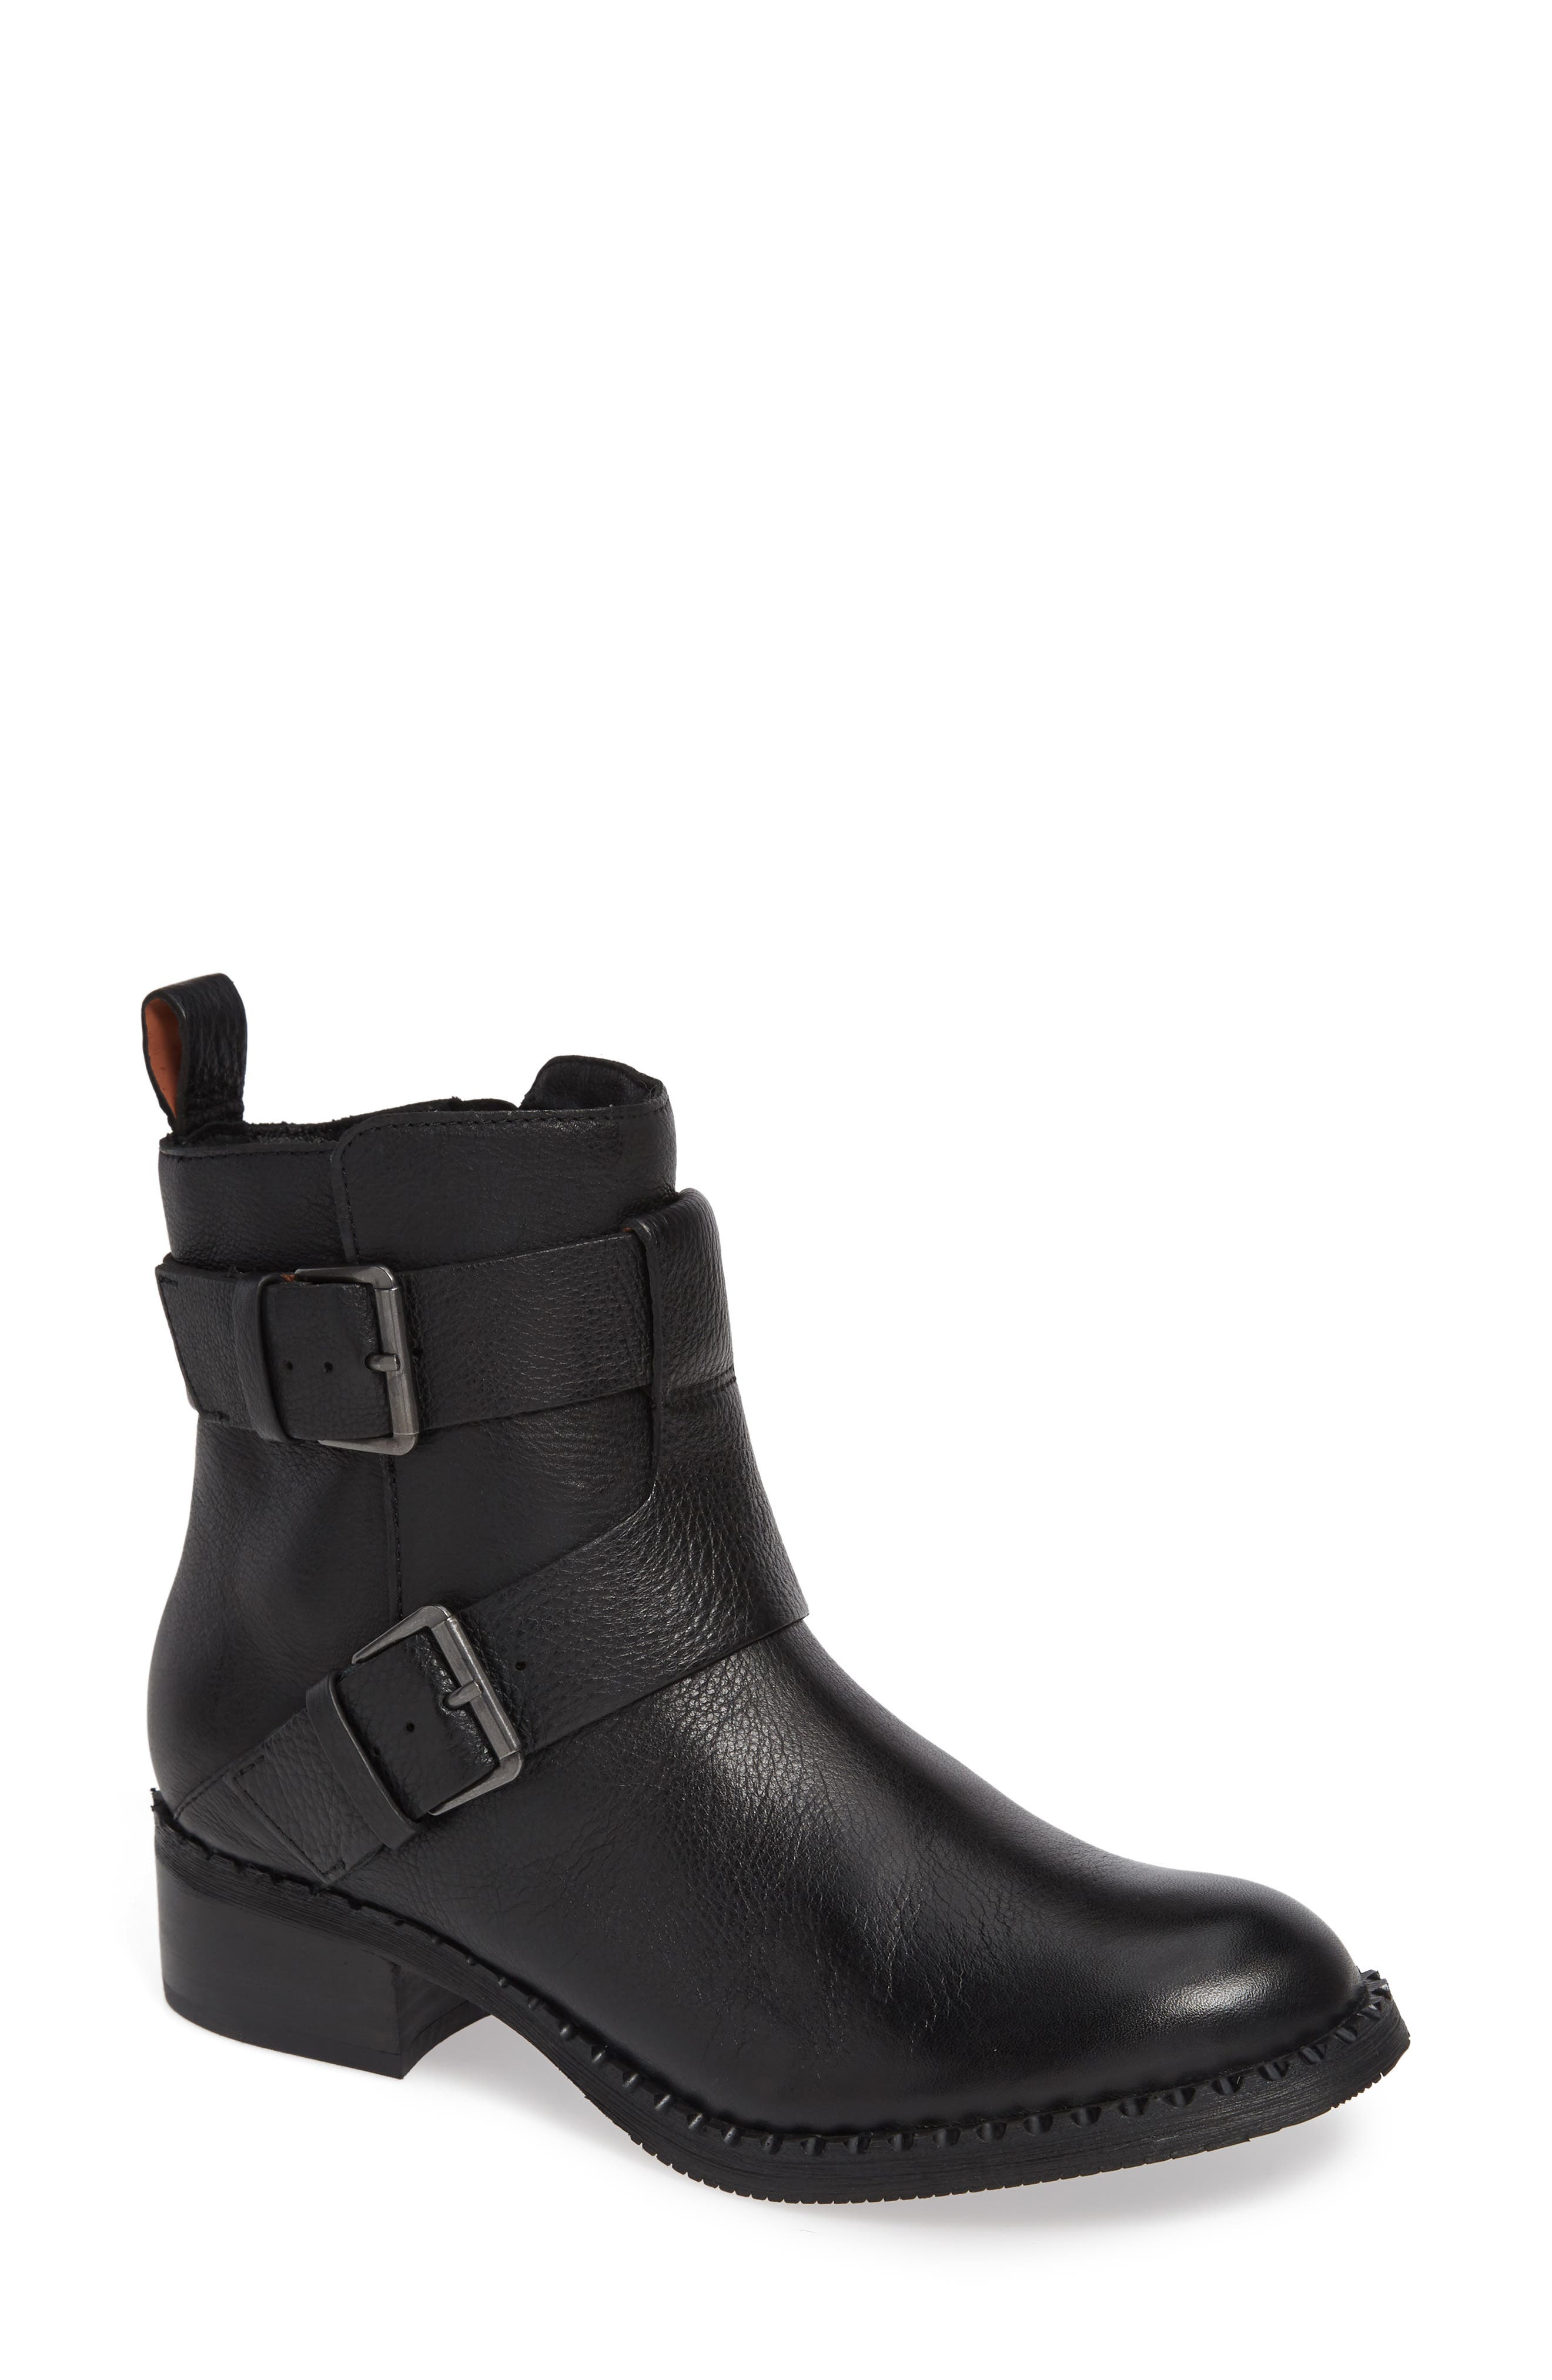 kenneth cole motorcycle boots